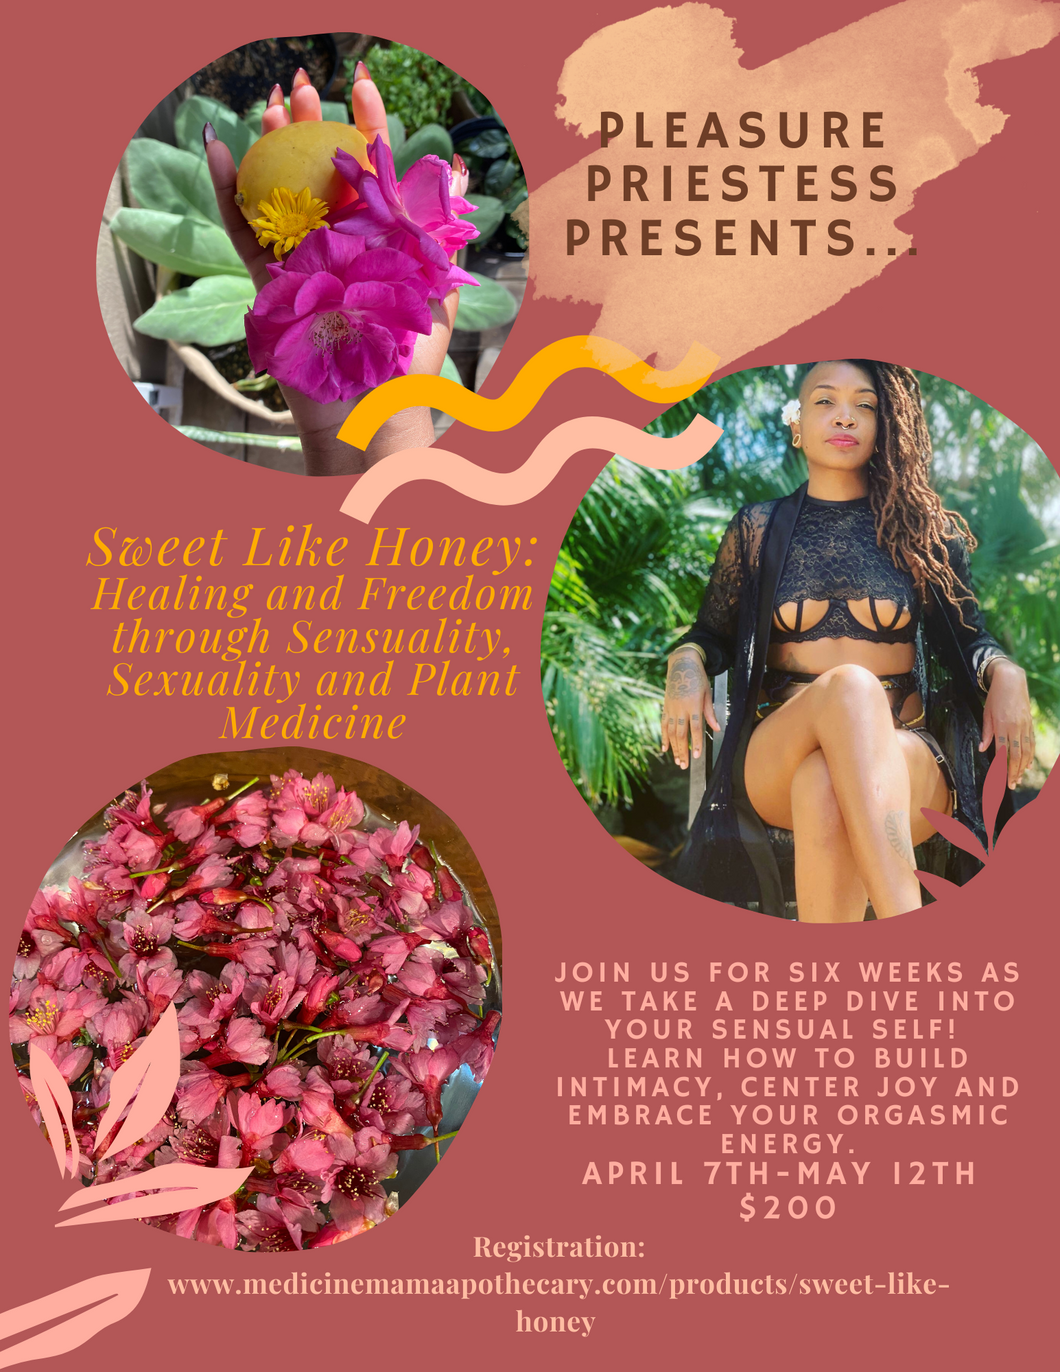 Sweet Like Honey: Healing and Freedom through Sensuality, Sexuality and Plant Medicine